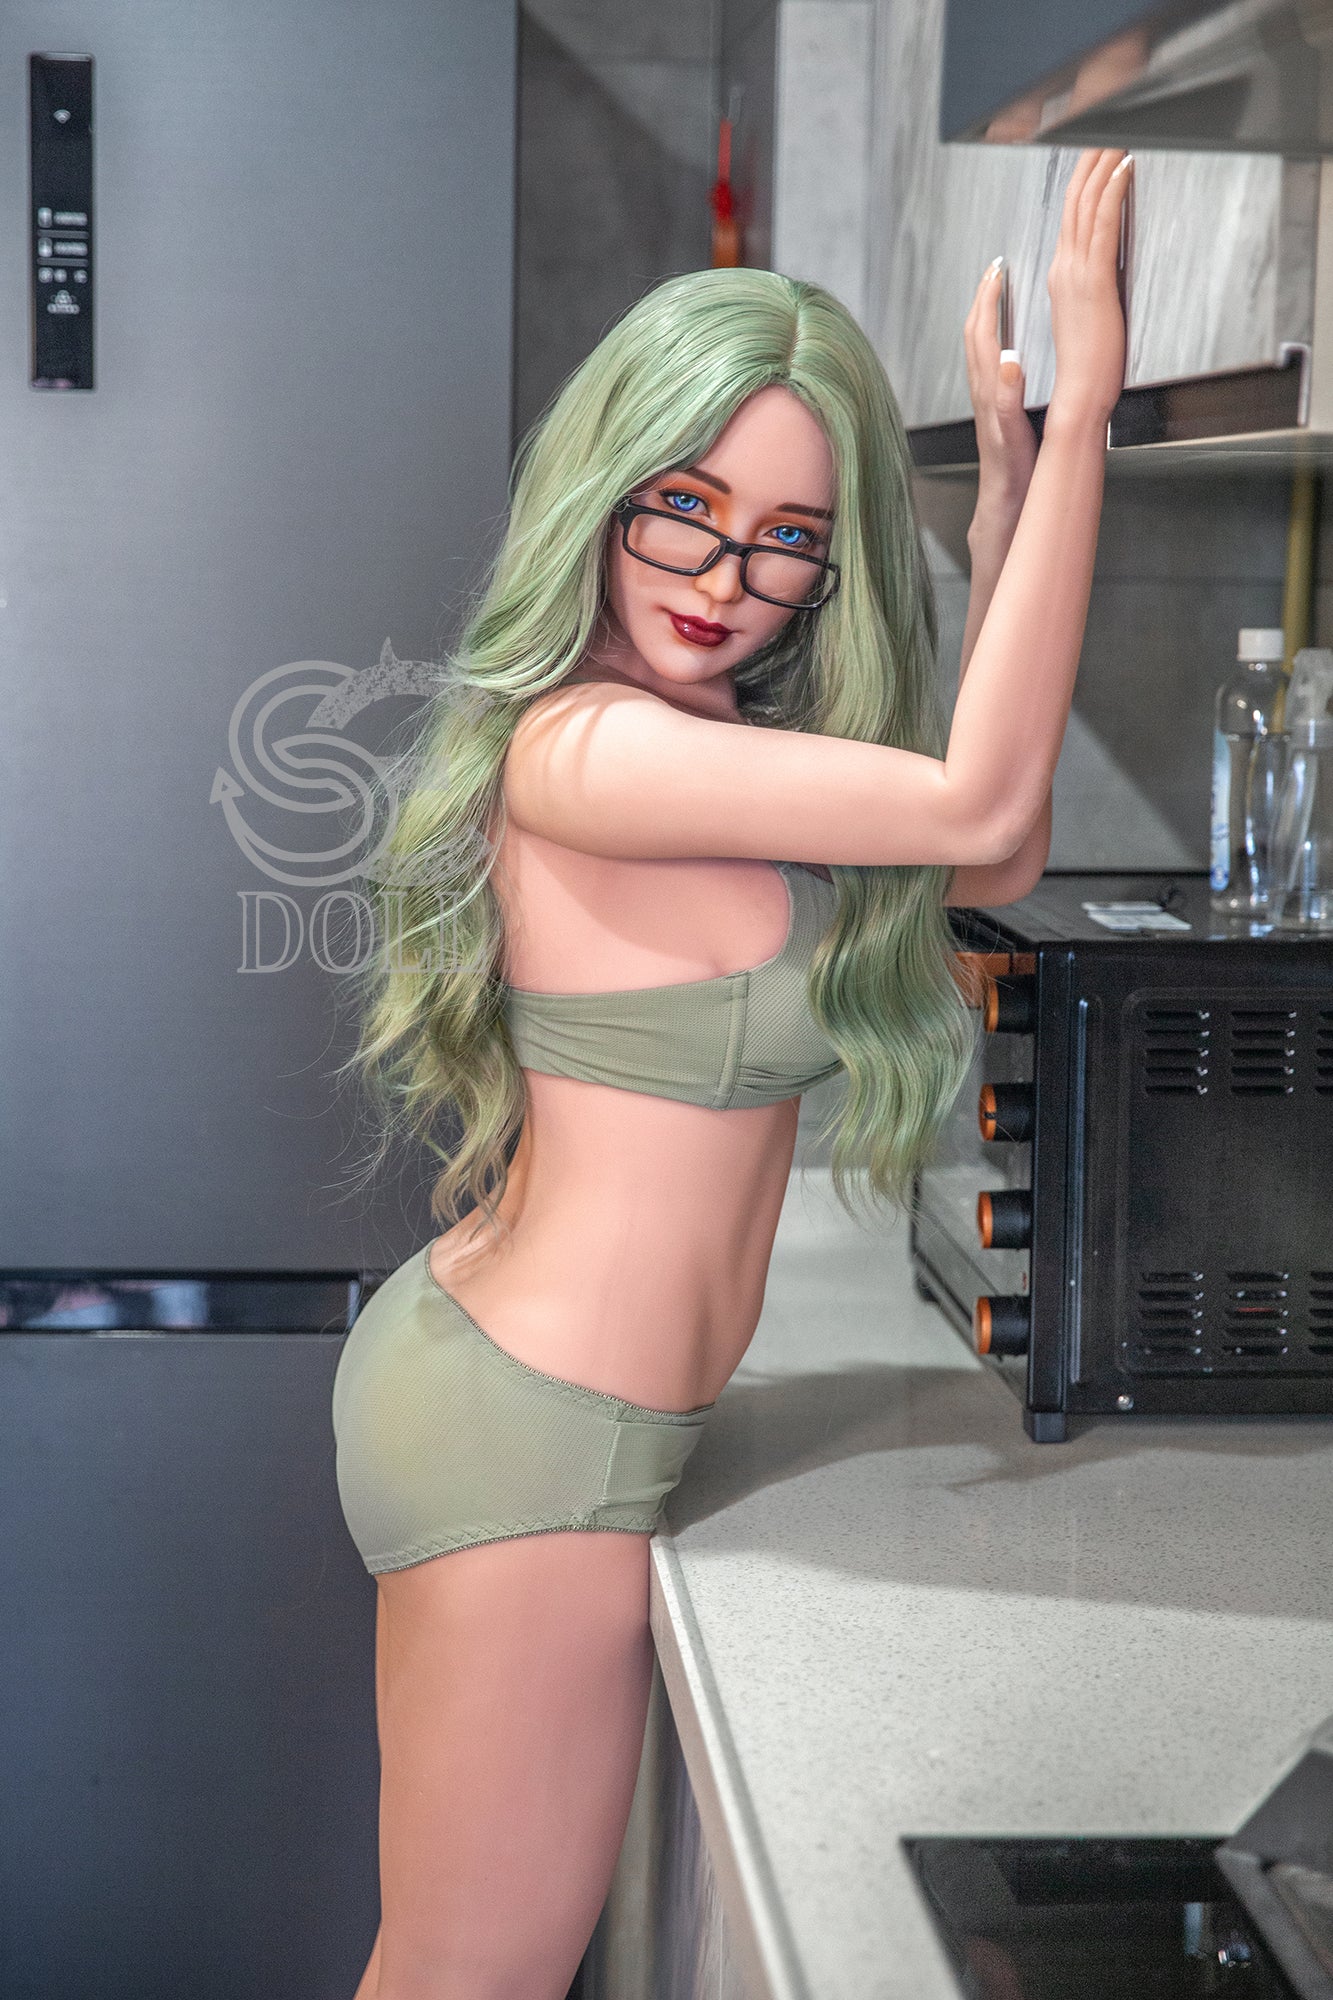 SEDOLL 163 cm E TPE - Gessica | Buy Sex Dolls at DOLLS ACTUALLY